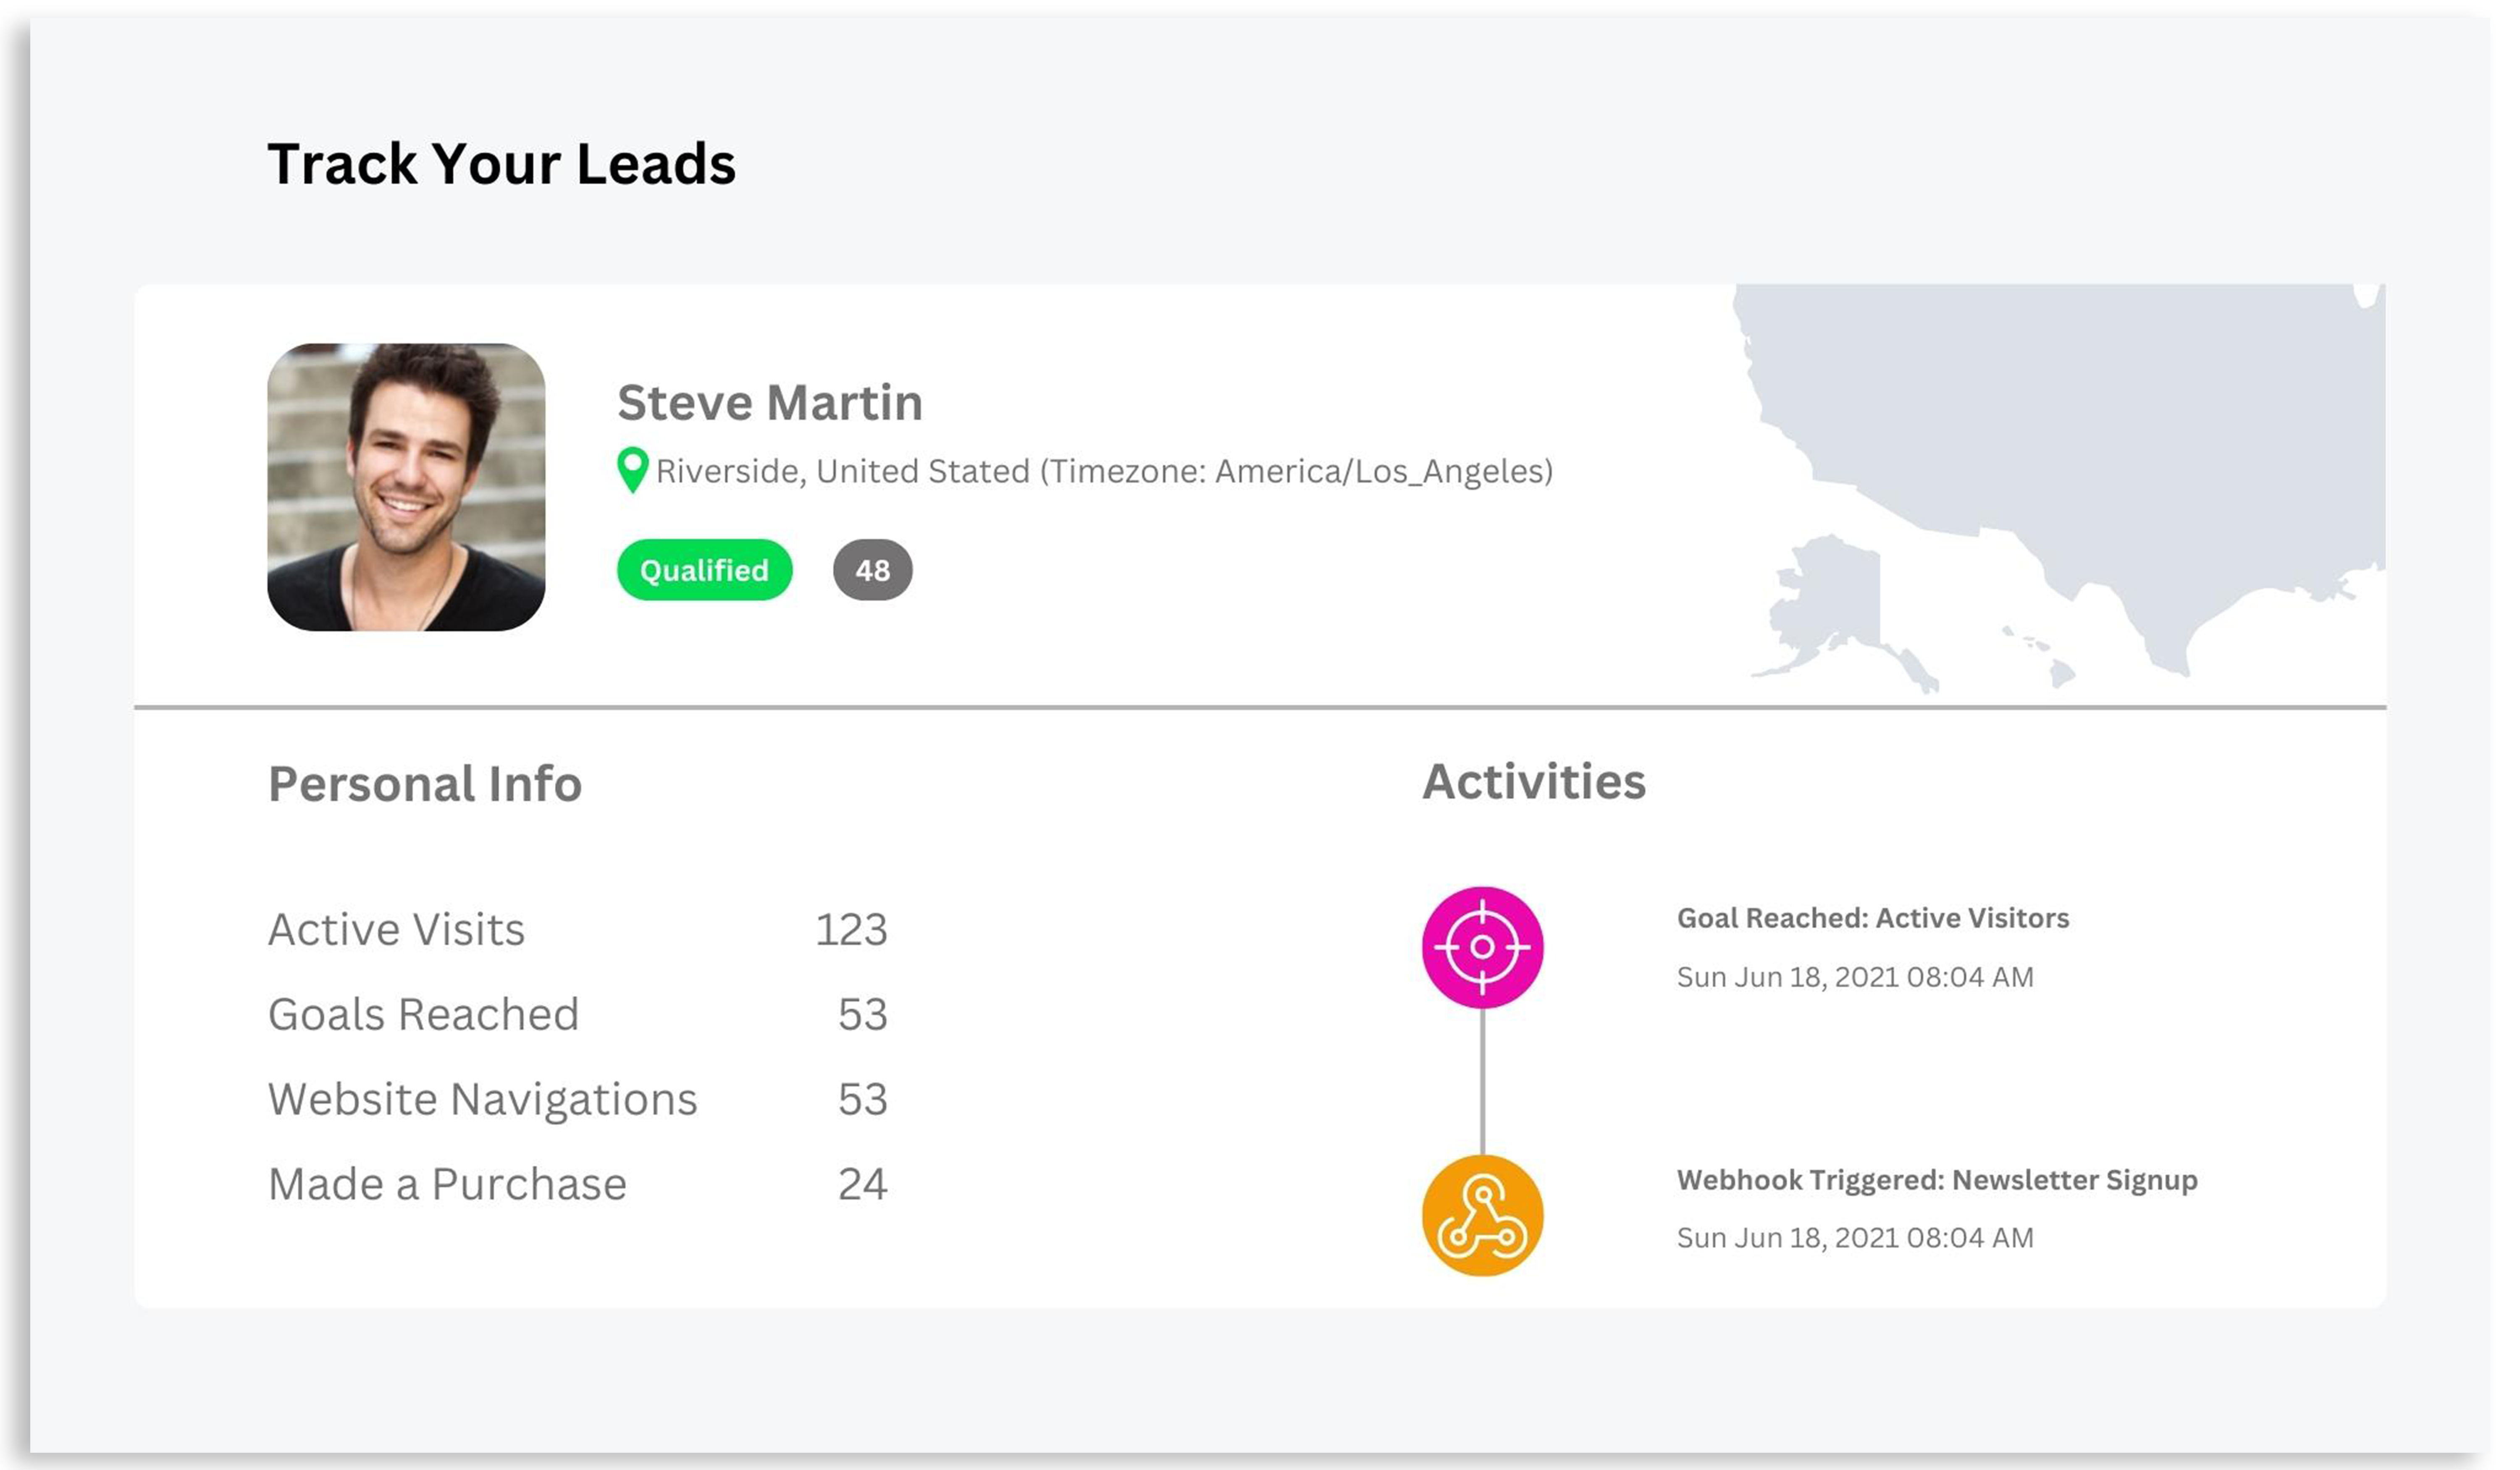 Use VBOUT’s built-in lead tracker to profile all your prospects activities starting from their first website visit to their last engagement with your marketing channels.